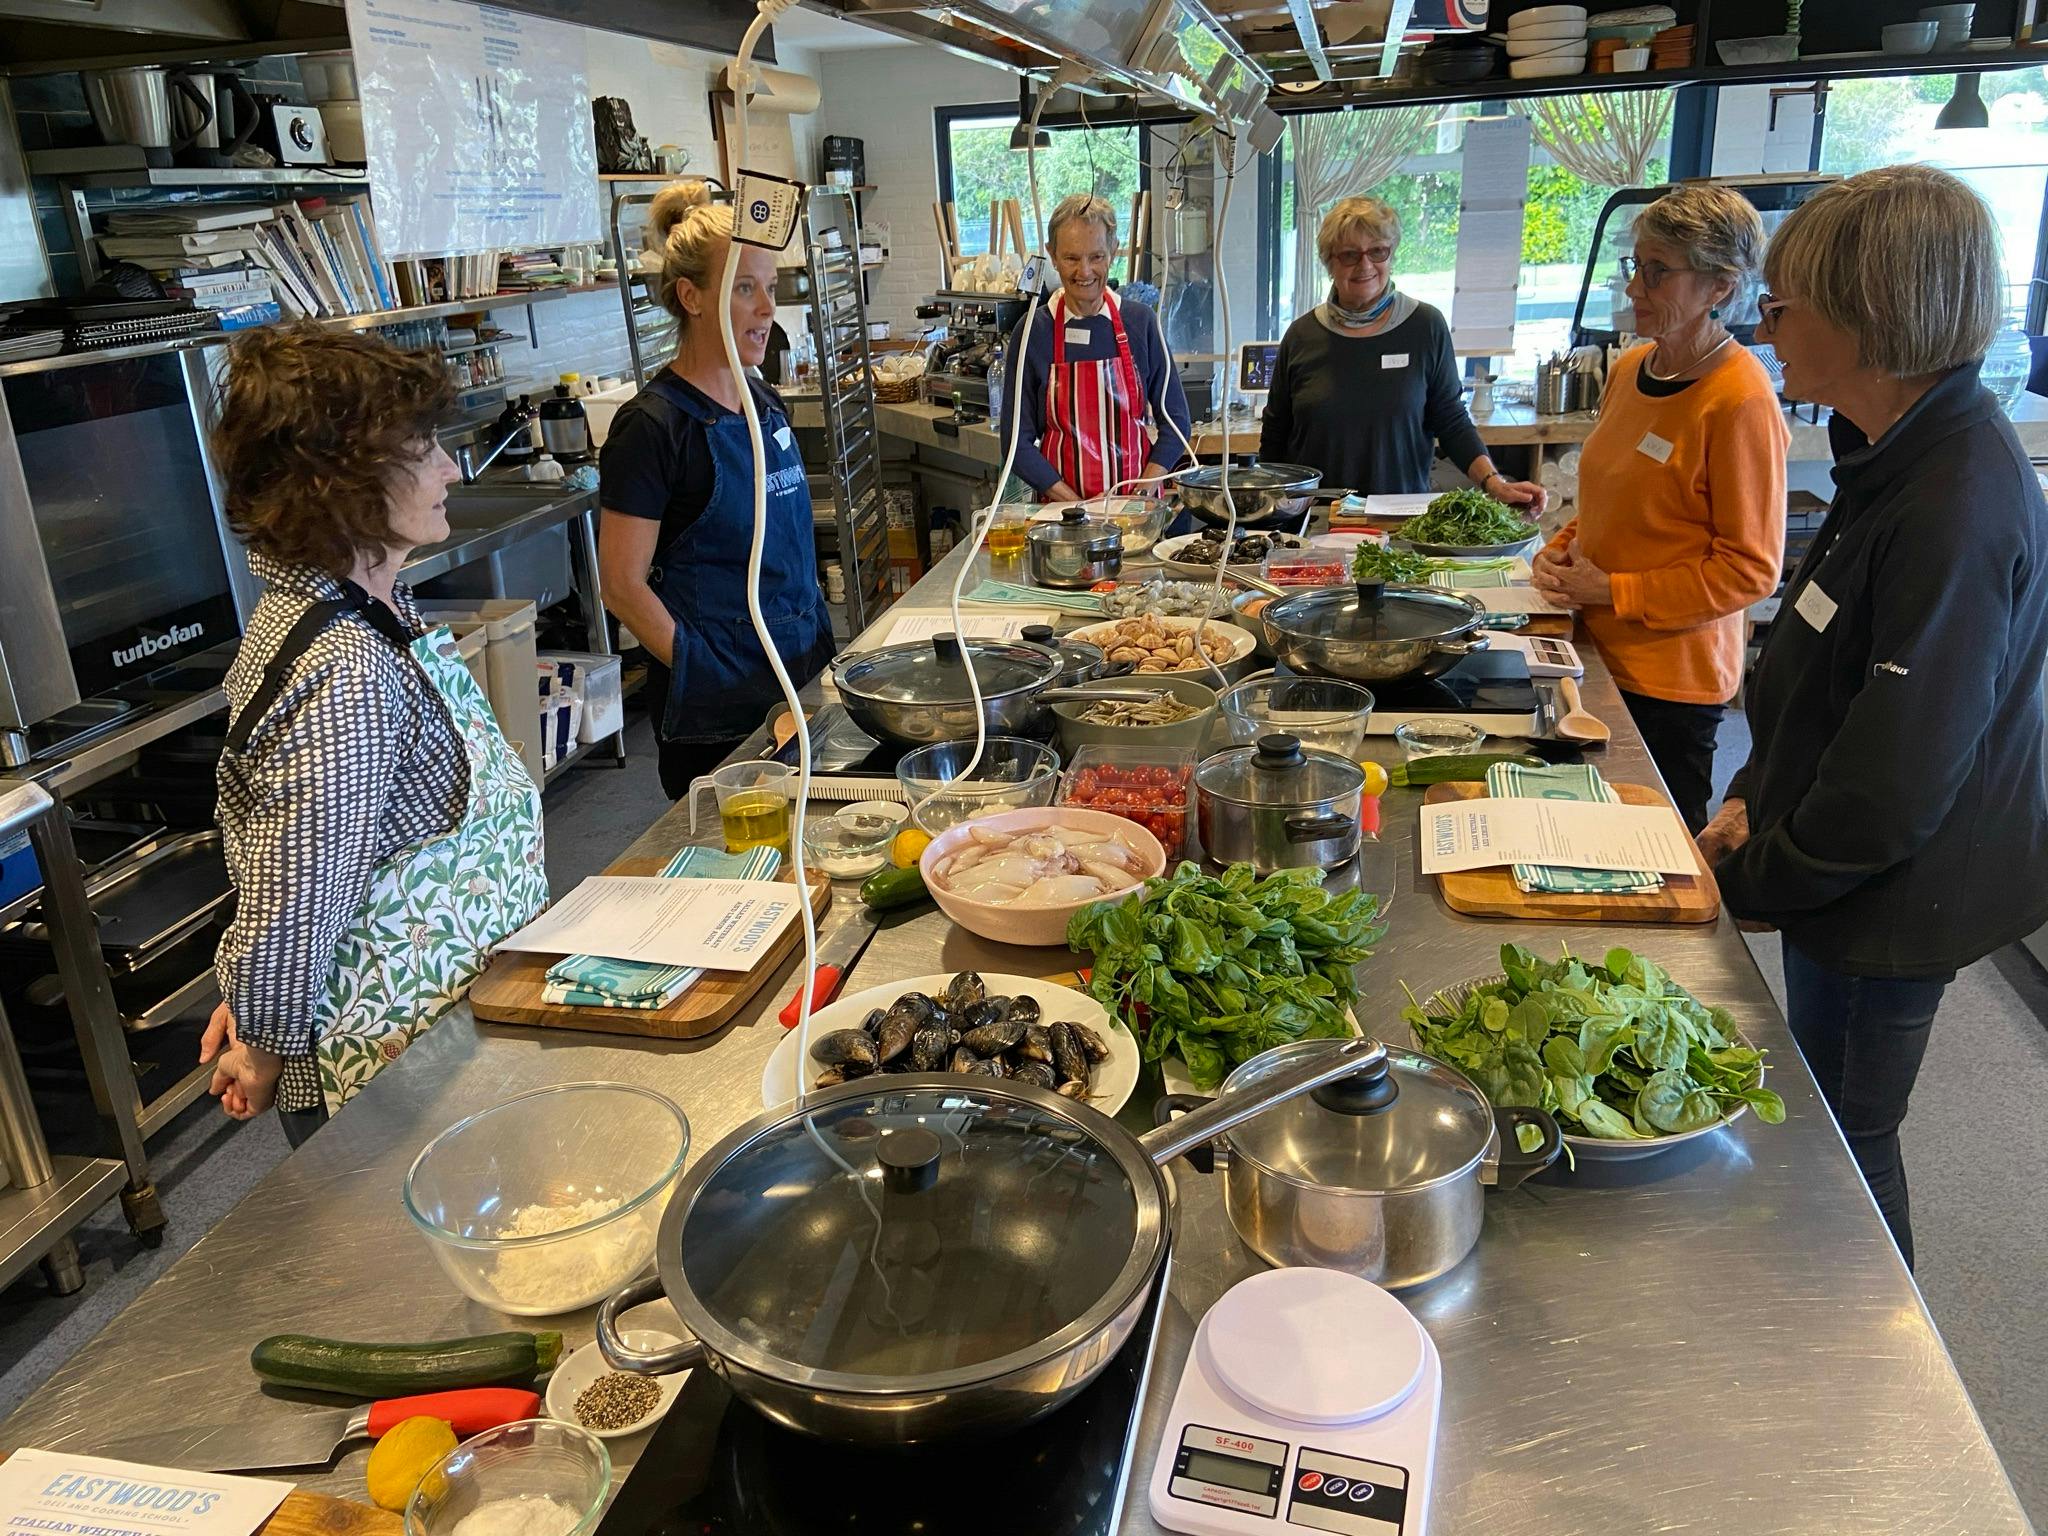 Cooking lesson on the Central Tilba tour